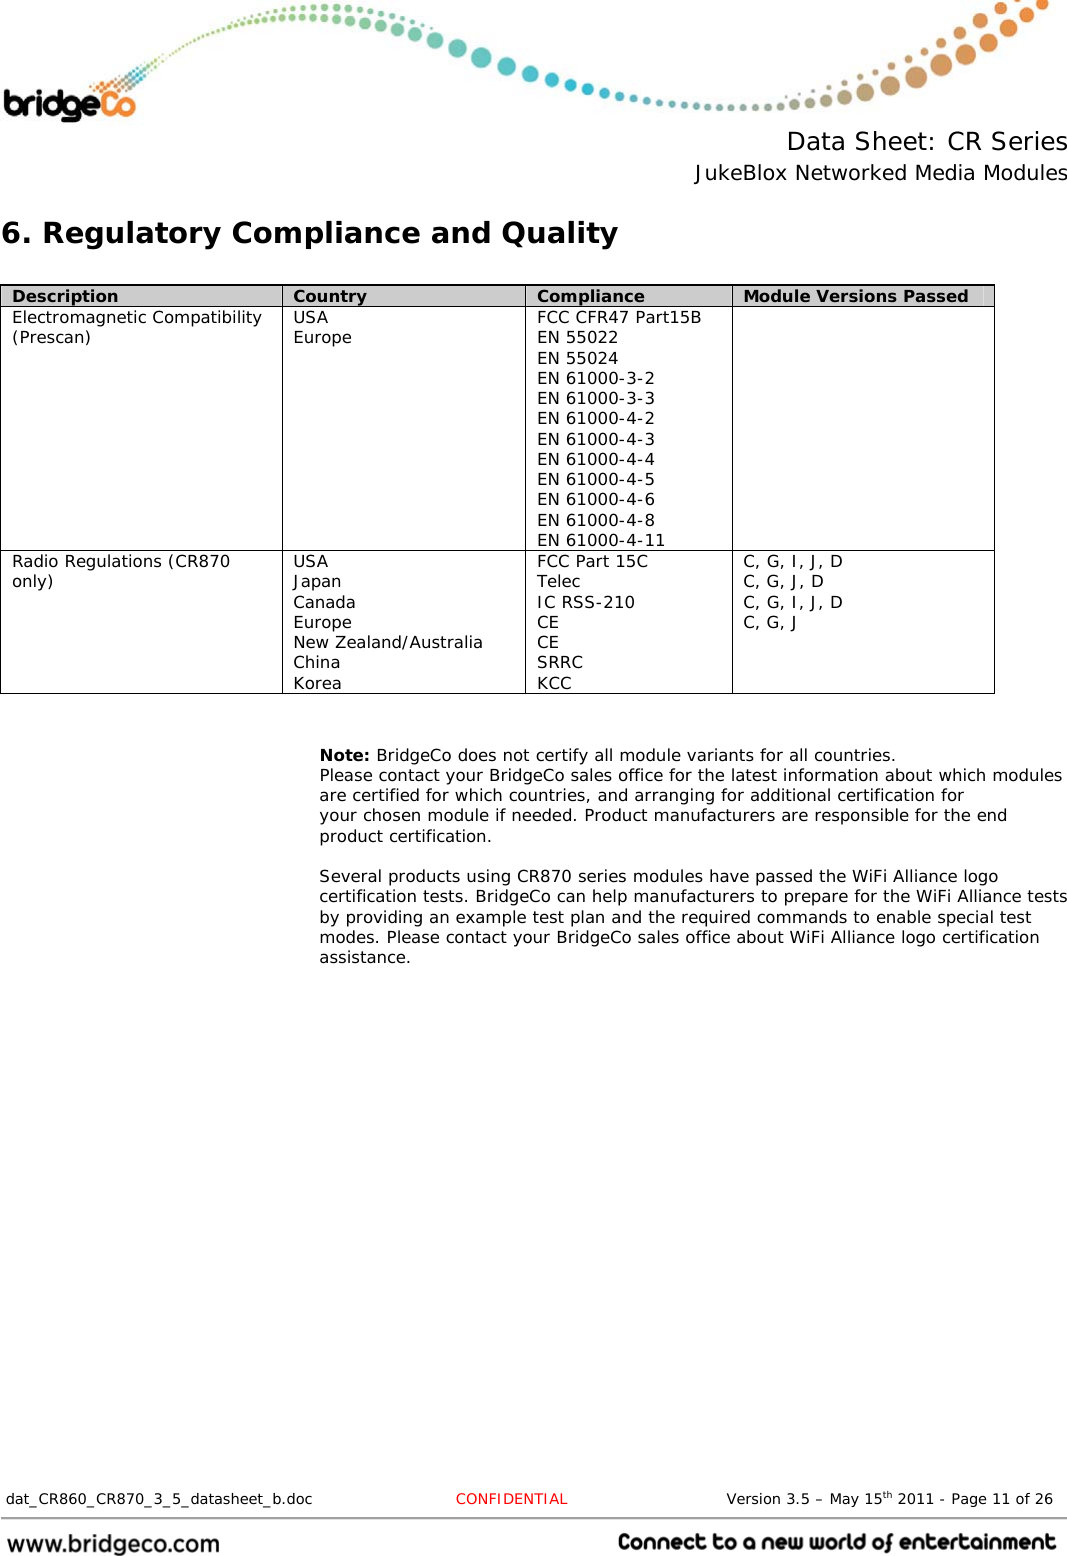  Data Sheet: CR Series JukeBlox Networked Media Modules  dat_CR860_CR870_3_5_datasheet_b.doc   CONFIDENTIAL                               Version 3.5 – May 15th 2011 - Page 11 of 26                                 6. Regulatory Compliance and Quality  Description  Country  Compliance  Module Versions Passed Electromagnetic Compatibility (Prescan)  USA Europe  FCC CFR47 Part15B EN 55022 EN 55024 EN 61000-3-2 EN 61000-3-3 EN 61000-4-2 EN 61000-4-3 EN 61000-4-4 EN 61000-4-5 EN 61000-4-6 EN 61000-4-8 EN 61000-4-11  Radio Regulations (CR870 only)  USA Japan Canada Europe New Zealand/Australia China Korea FCC Part 15C Telec IC RSS-210 CE CE SRRC KCC C, G, I, J, D C, G, J, D C, G, I, J, D C, G, J   Note: BridgeCo does not certify all module variants for all countries. Please contact your BridgeCo sales office for the latest information about which modules are certified for which countries, and arranging for additional certification for your chosen module if needed. Product manufacturers are responsible for the end product certification.  Several products using CR870 series modules have passed the WiFi Alliance logo certification tests. BridgeCo can help manufacturers to prepare for the WiFi Alliance tests by providing an example test plan and the required commands to enable special test modes. Please contact your BridgeCo sales office about WiFi Alliance logo certification assistance.  